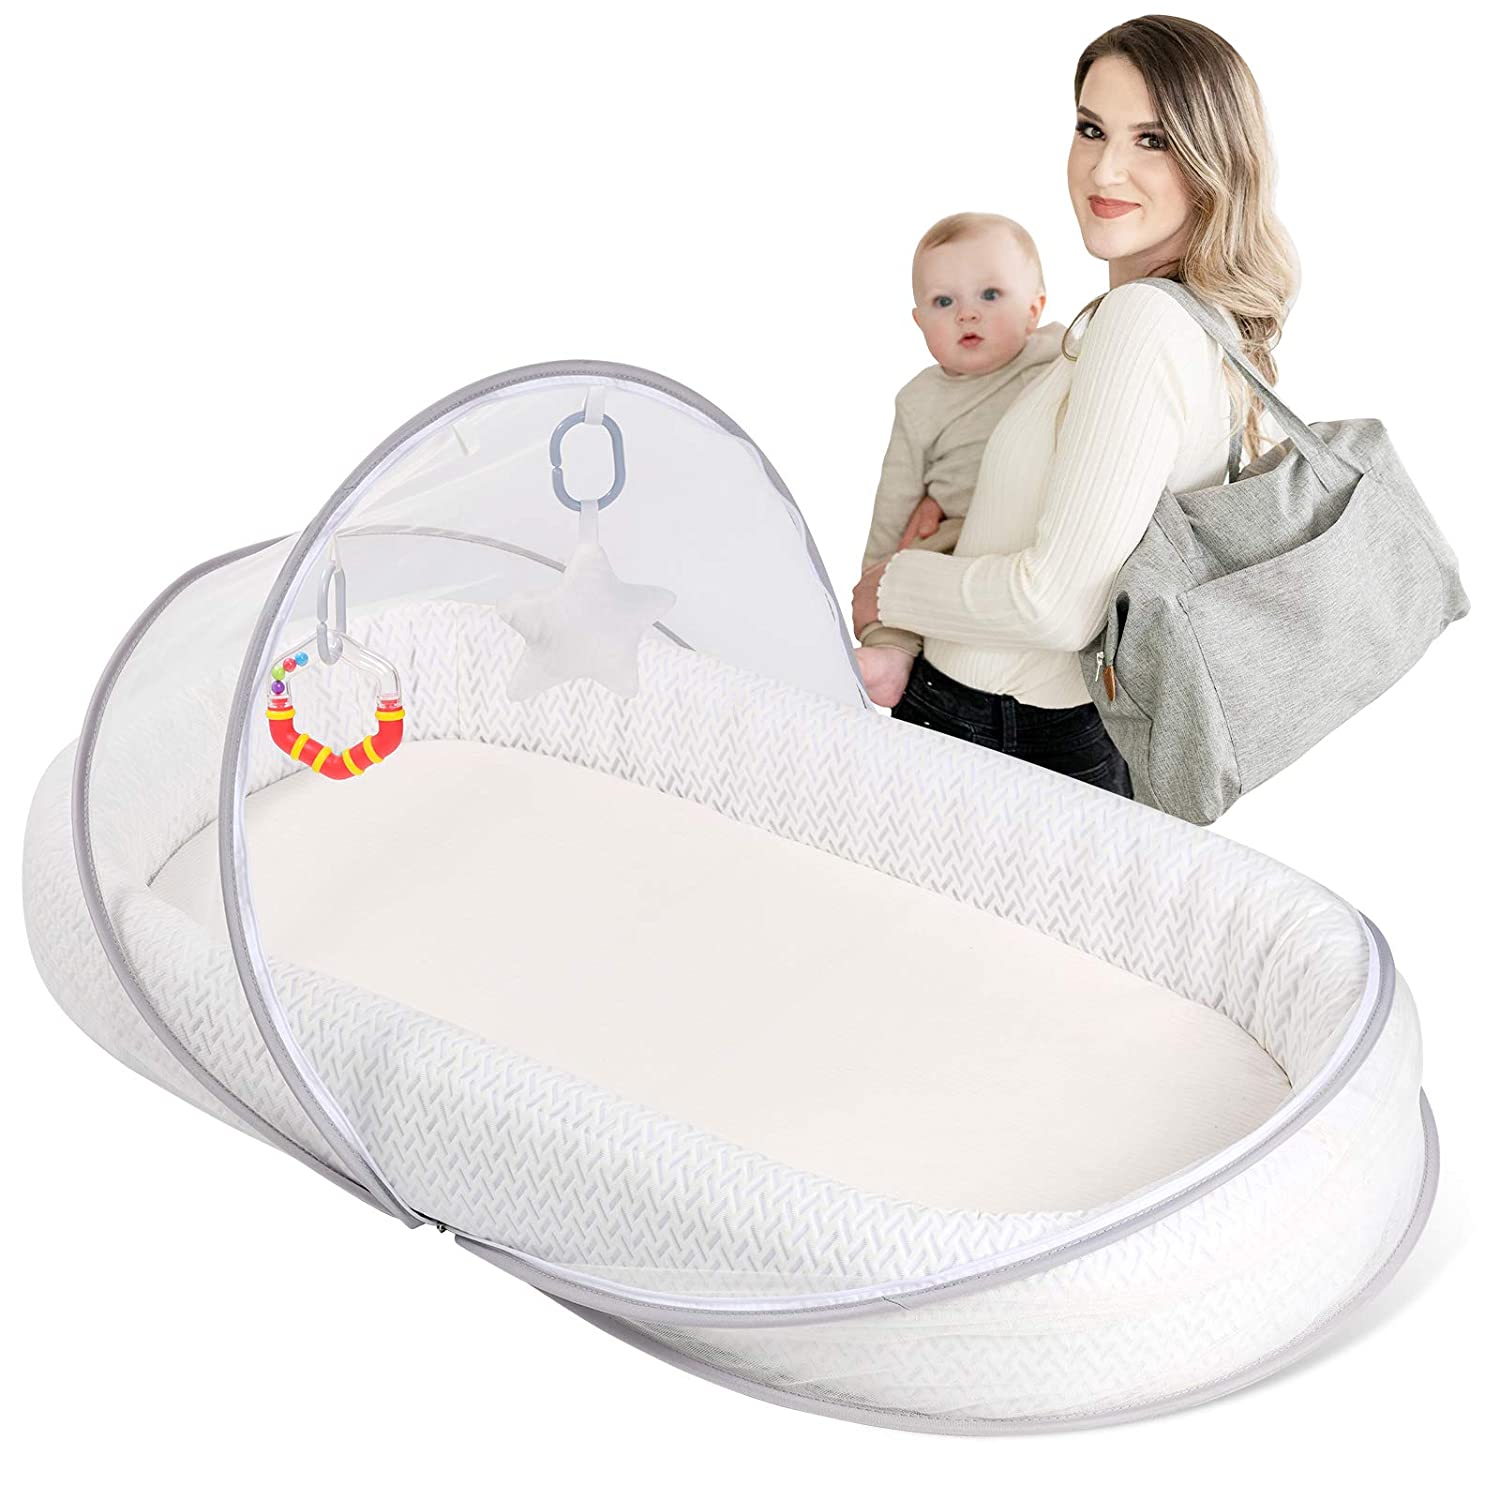 Best Baby Lounger for a Hands-Free Bonding | Storables